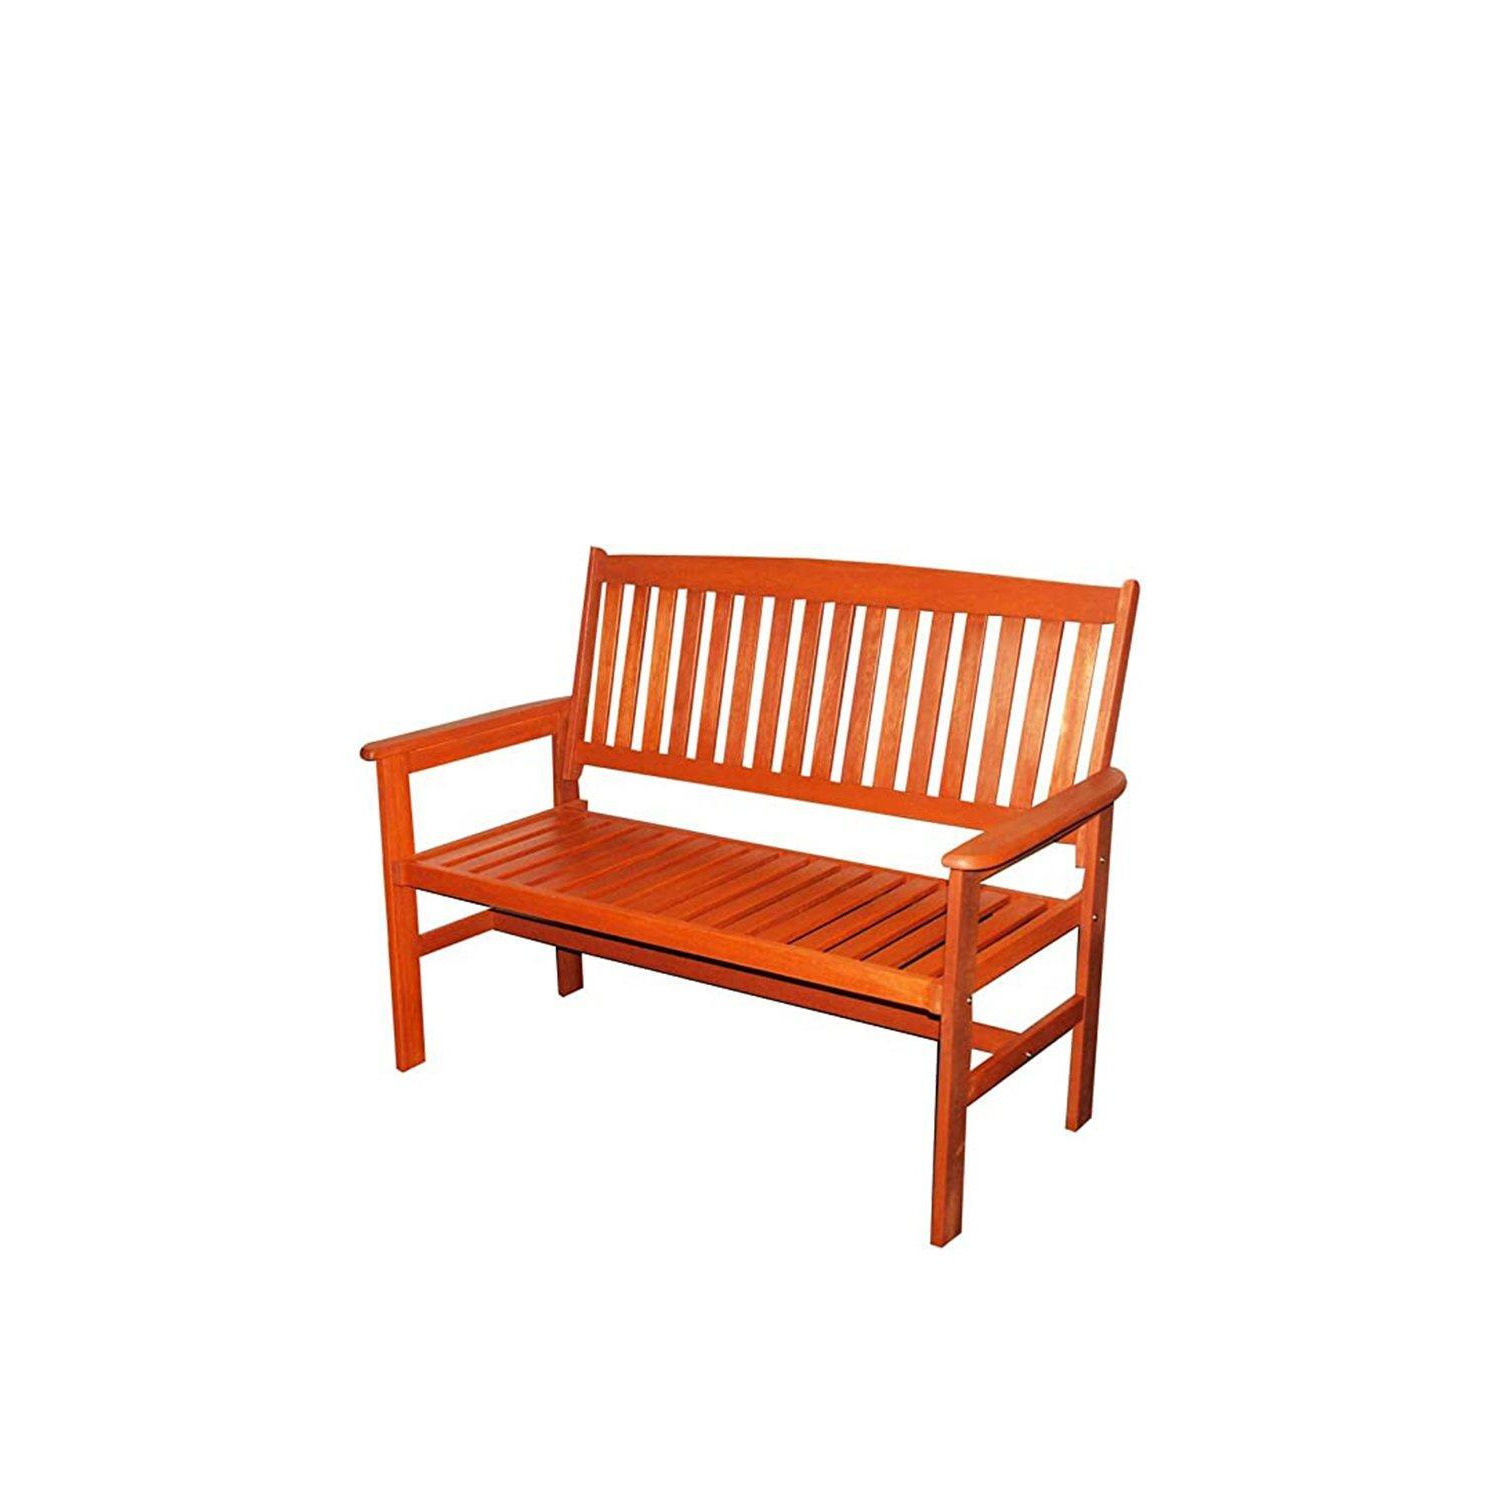 2 Seater 120cm Wide Traditional Hardwood Garden / Patio Bench - image 1